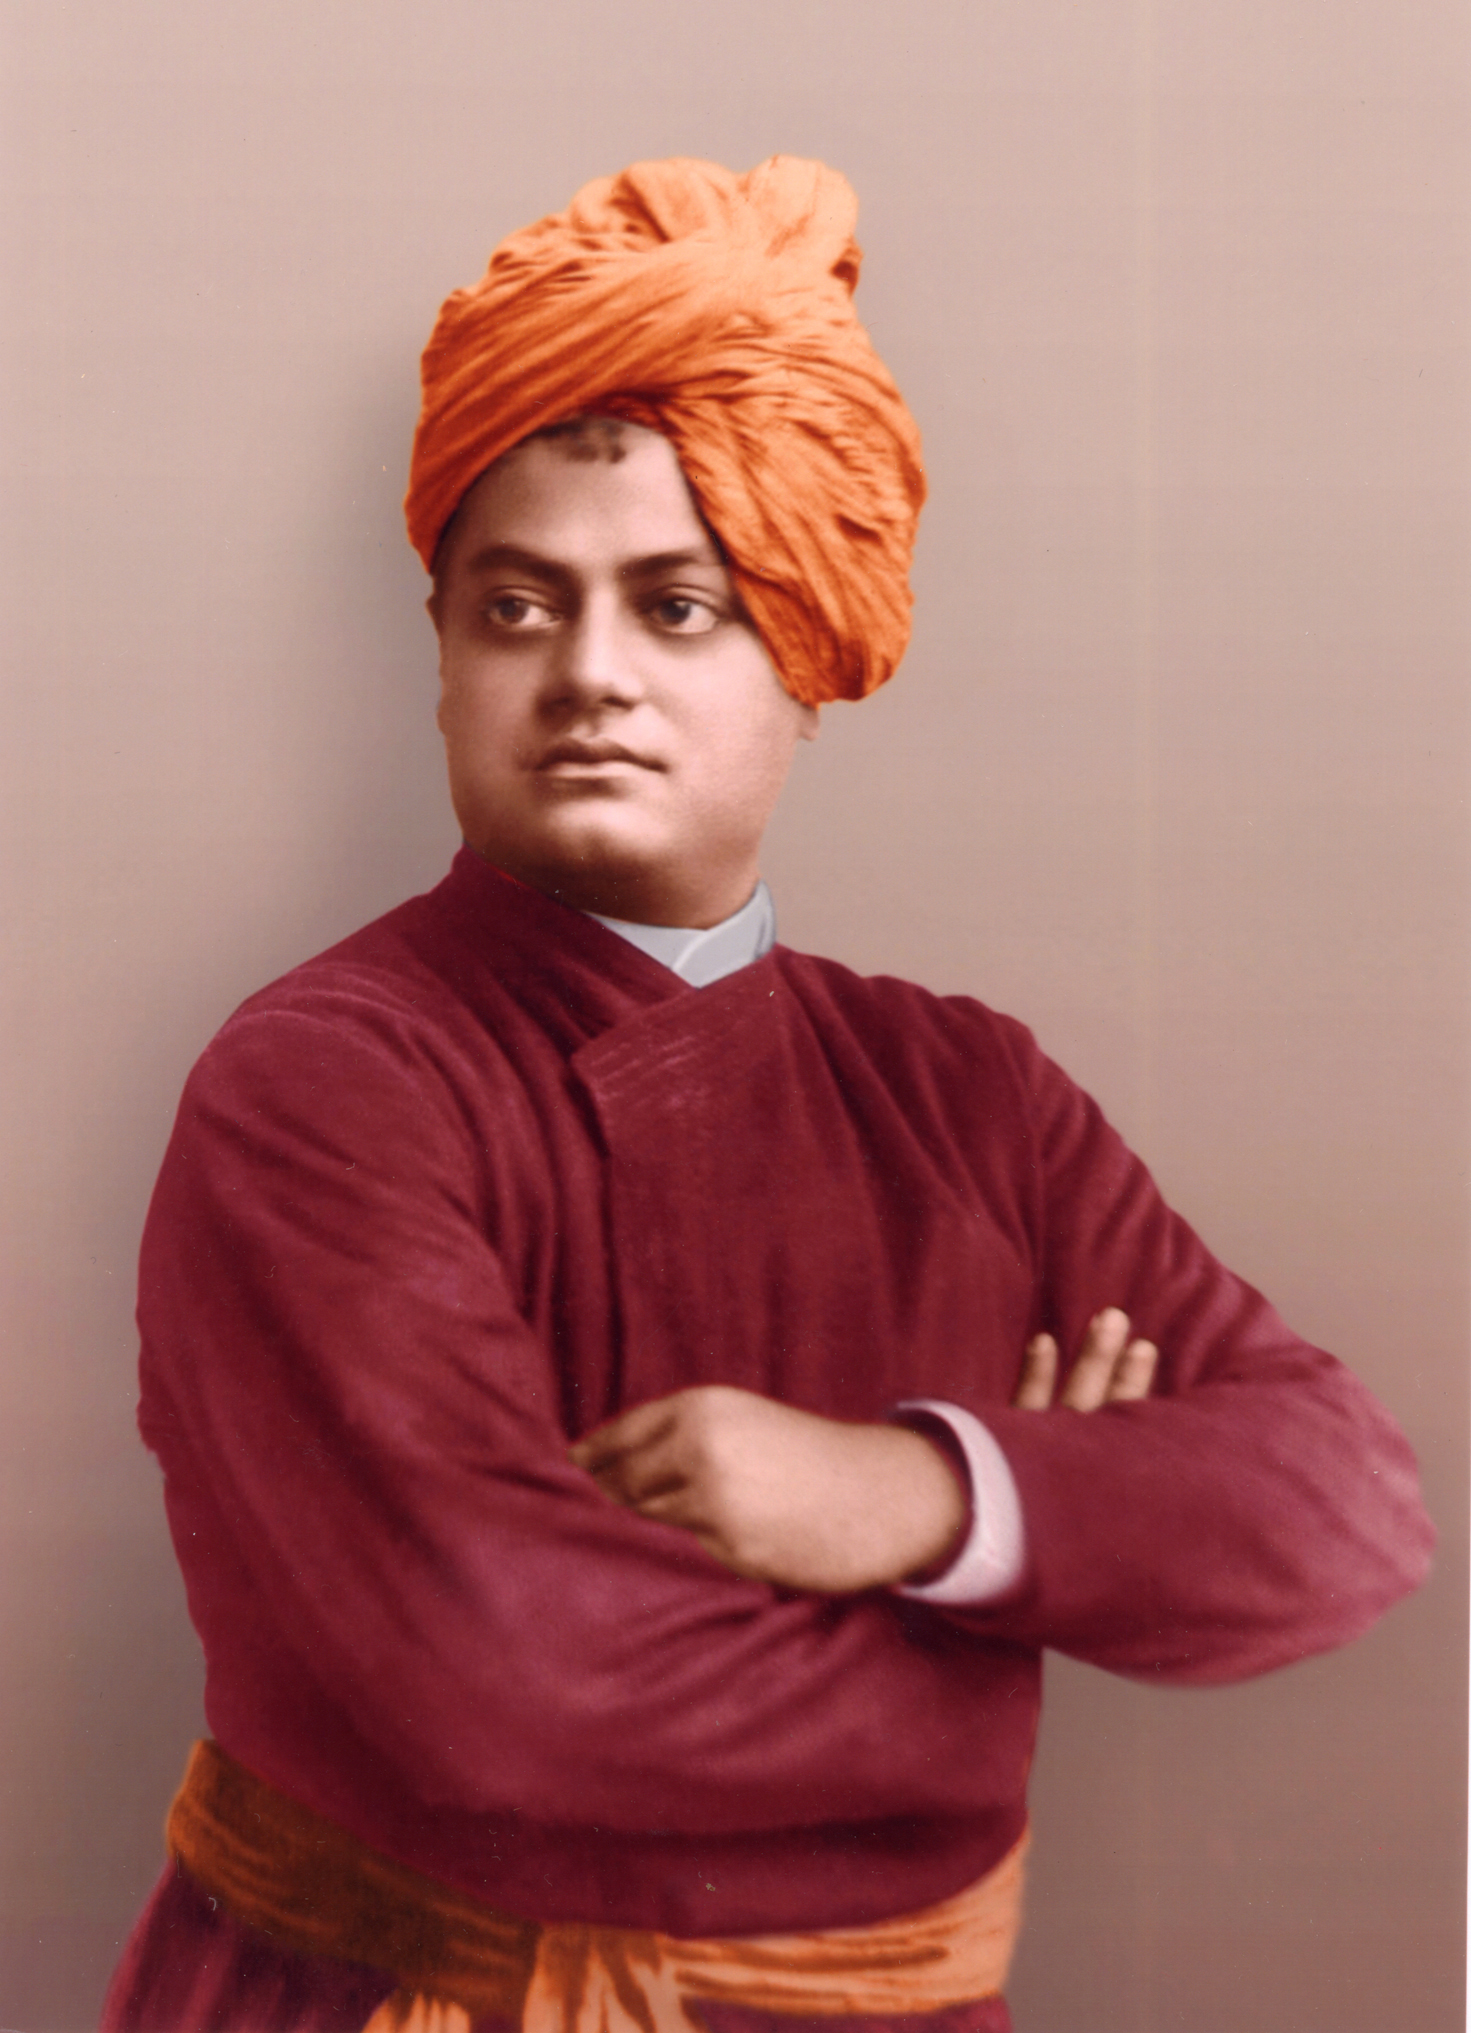 Colored photo of Swami Vivekananda with his arms crossed.